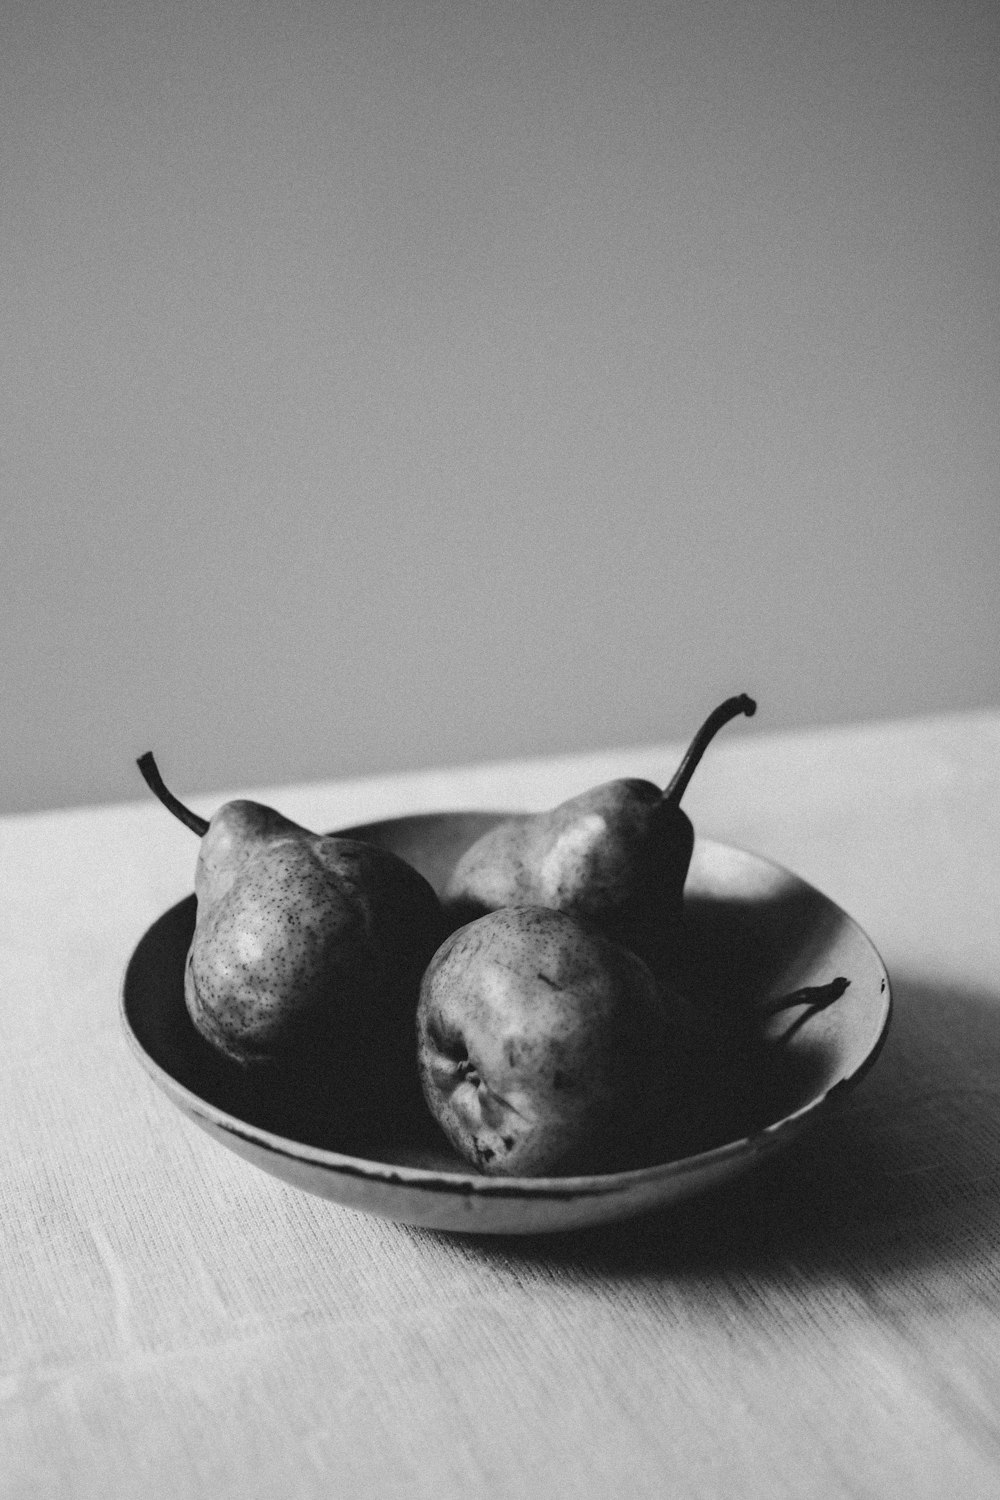 three pears in a bowl on a table